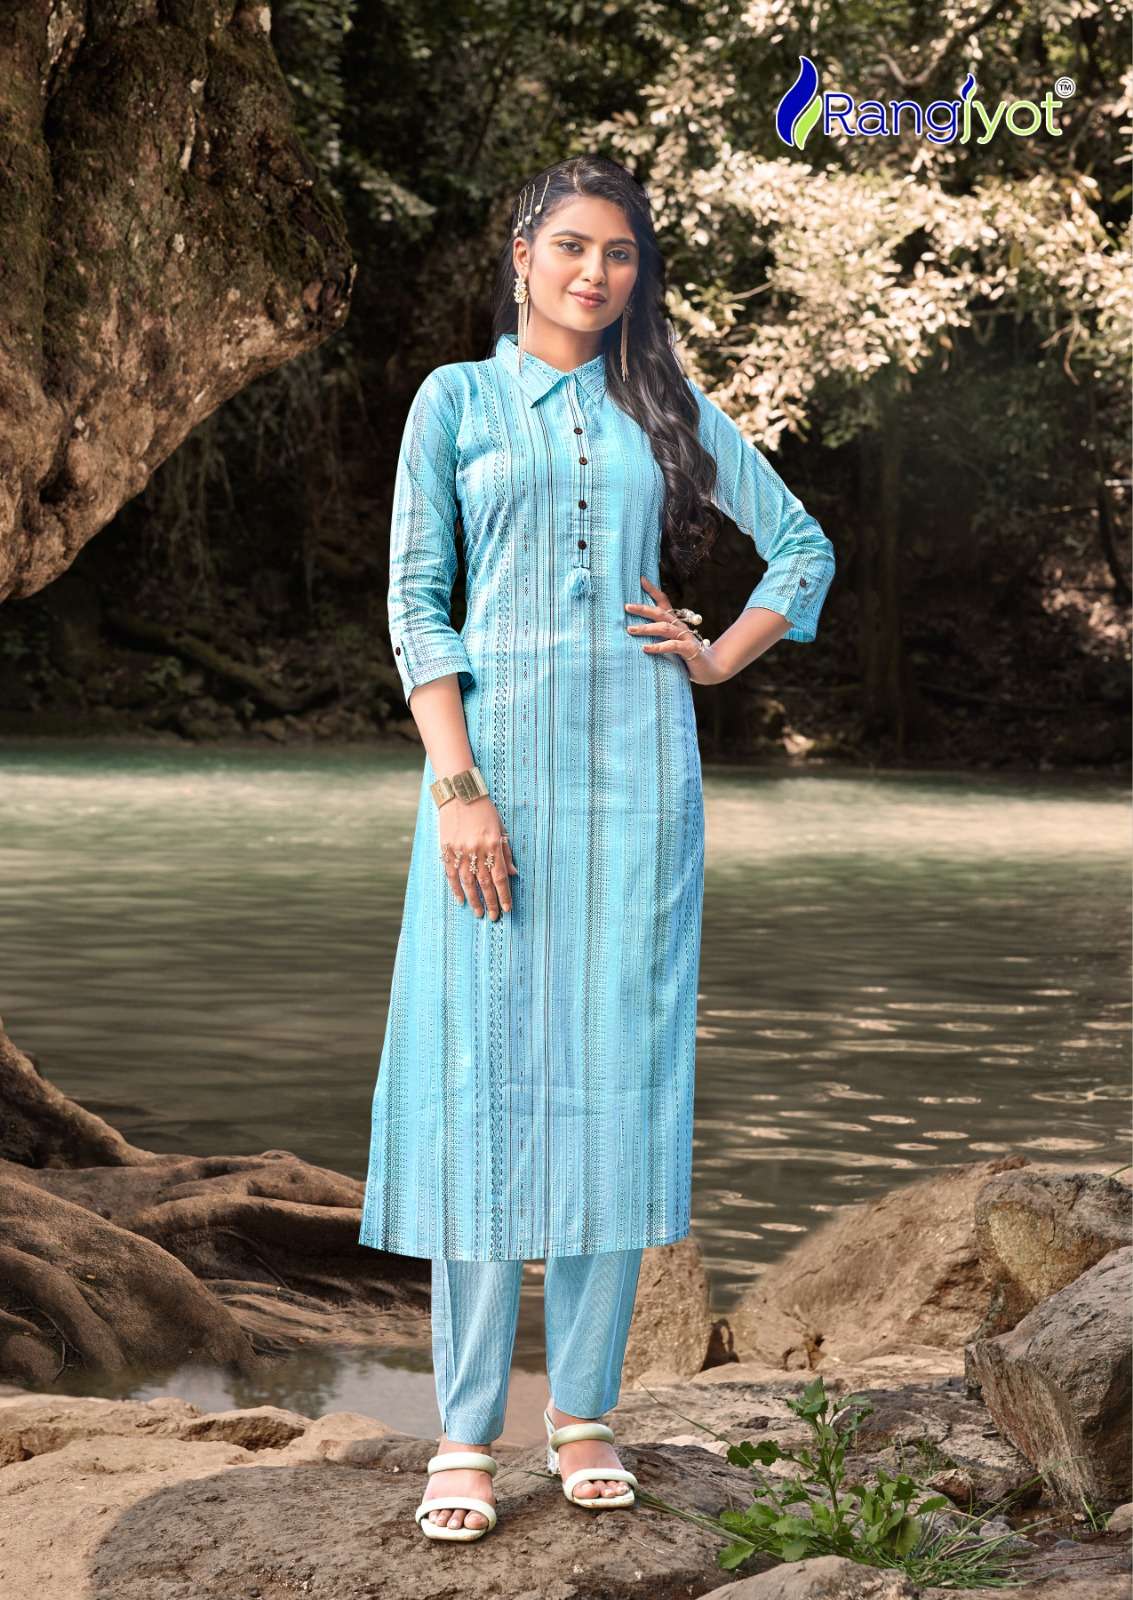 Where can we find good kurtis in Bangalore? - Quora